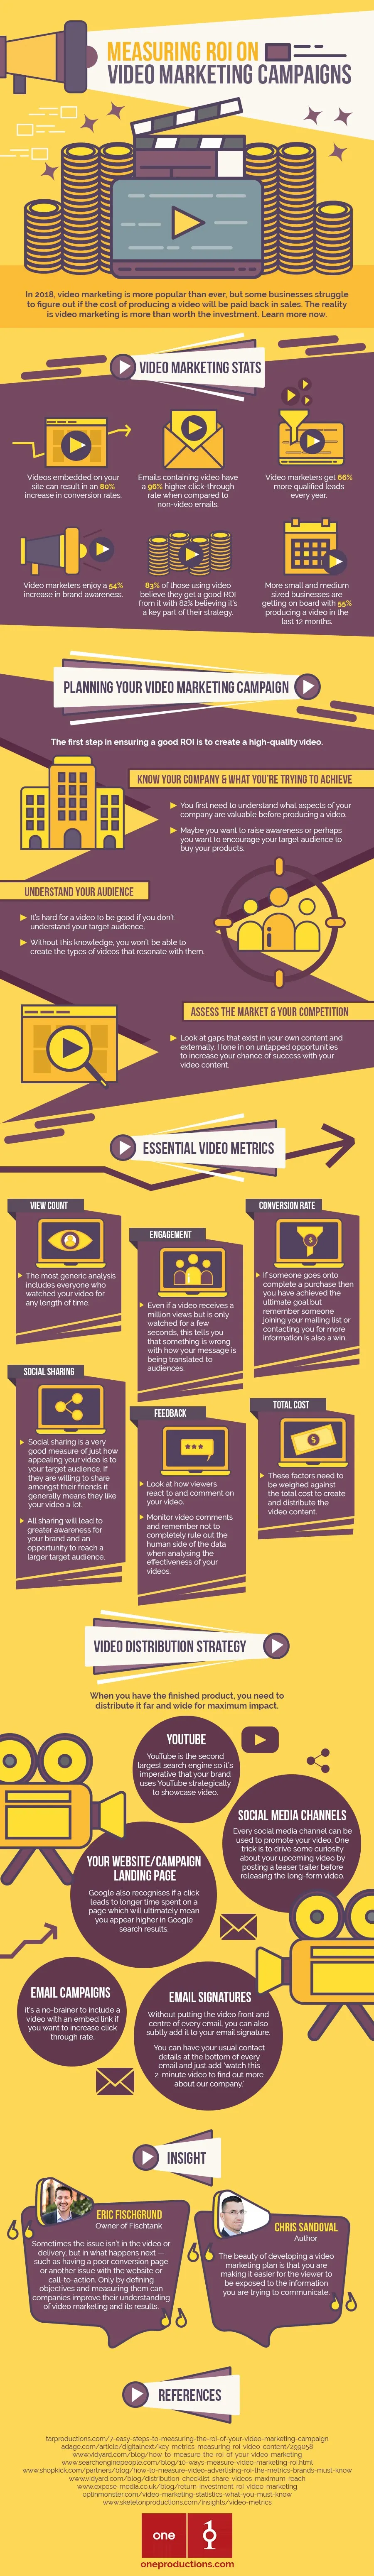 Measuring ROI on Video Marketing Campaigns [Infographic]